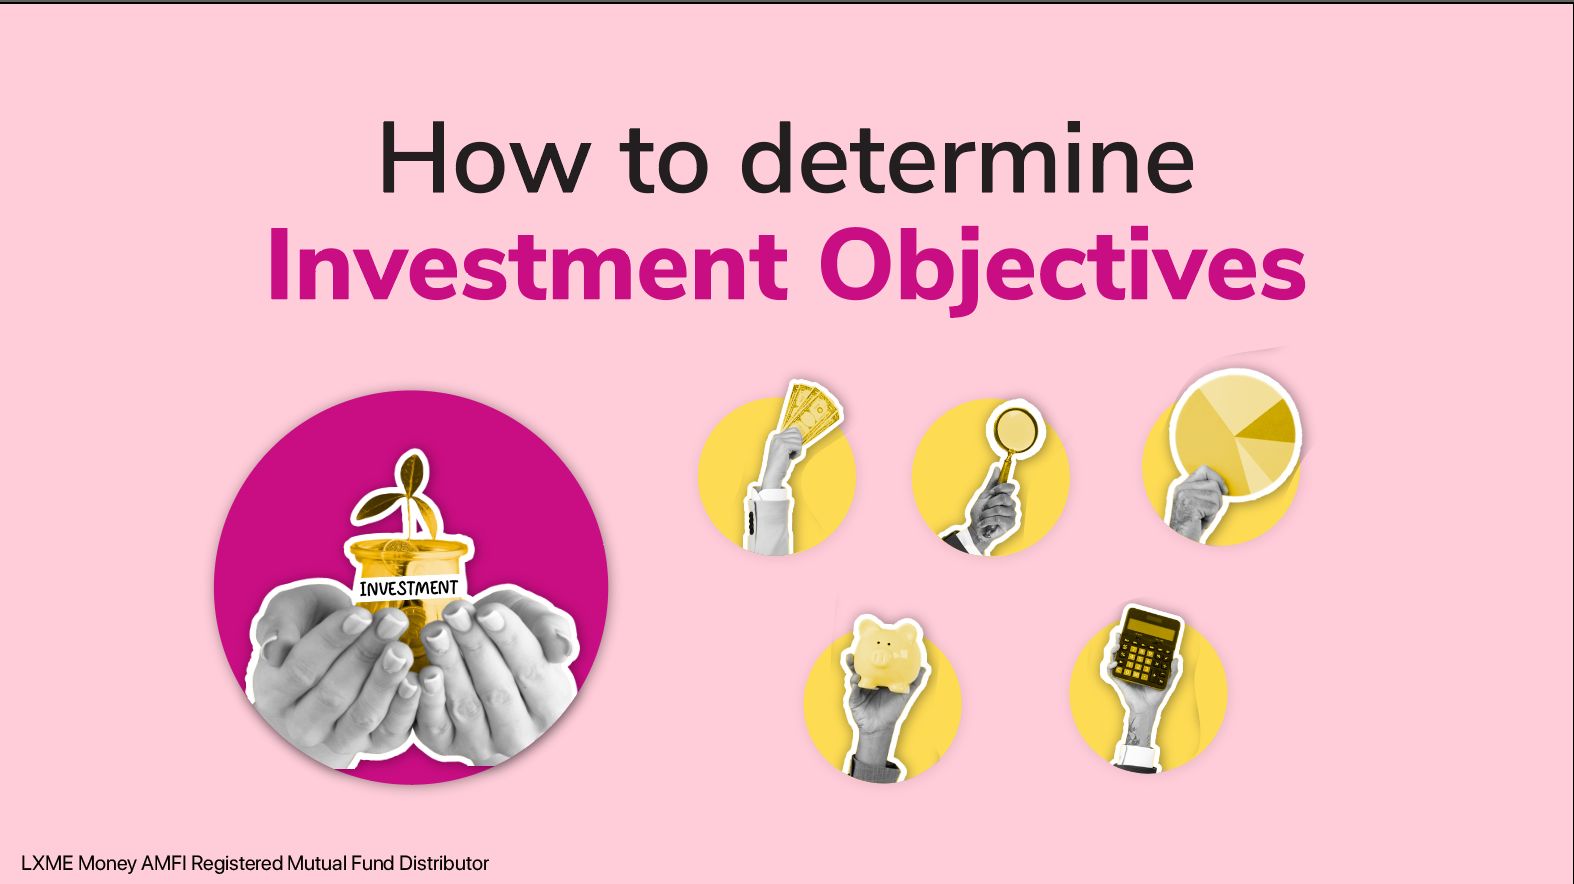 Determine Investment Objectives